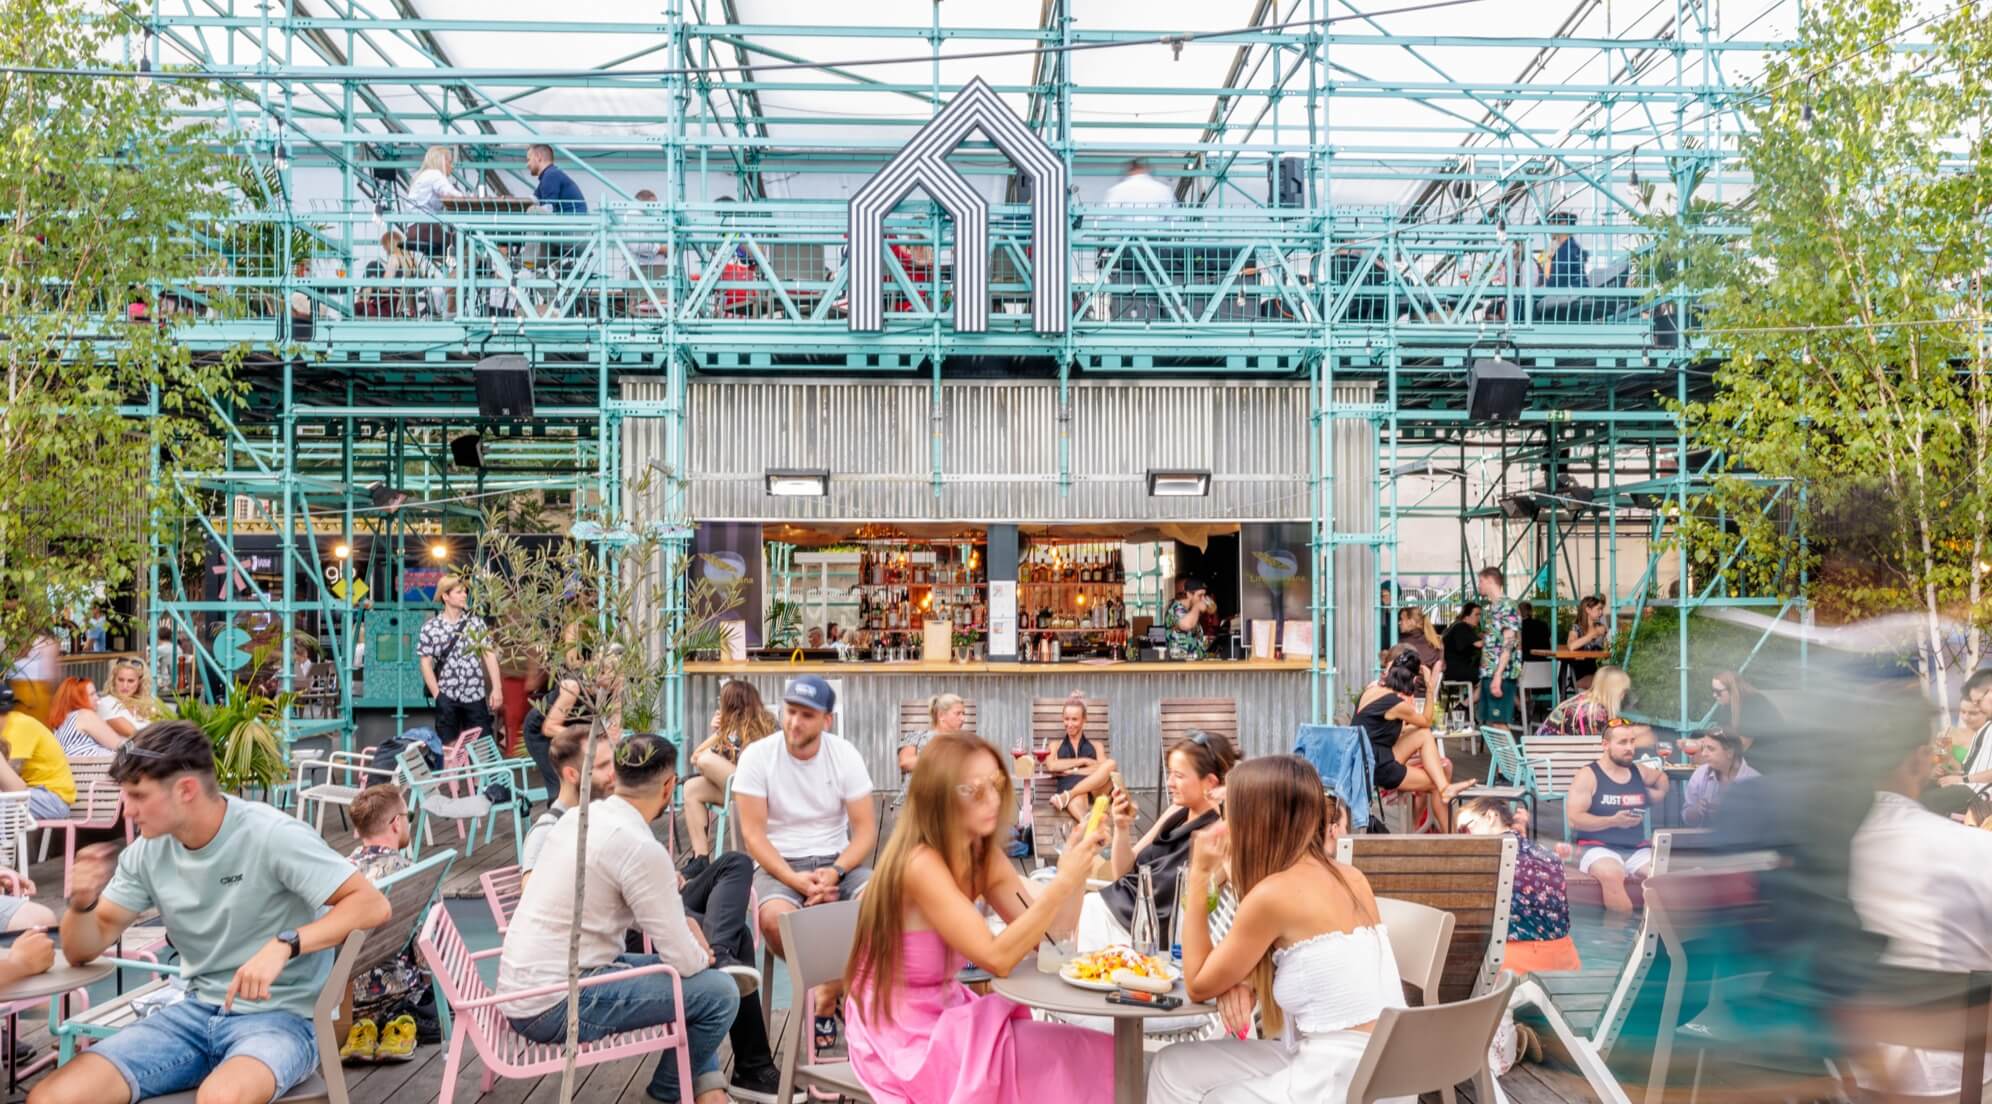 7 reasons why hosting an event at Manifesto Market is not only memorable, but also sustainable 